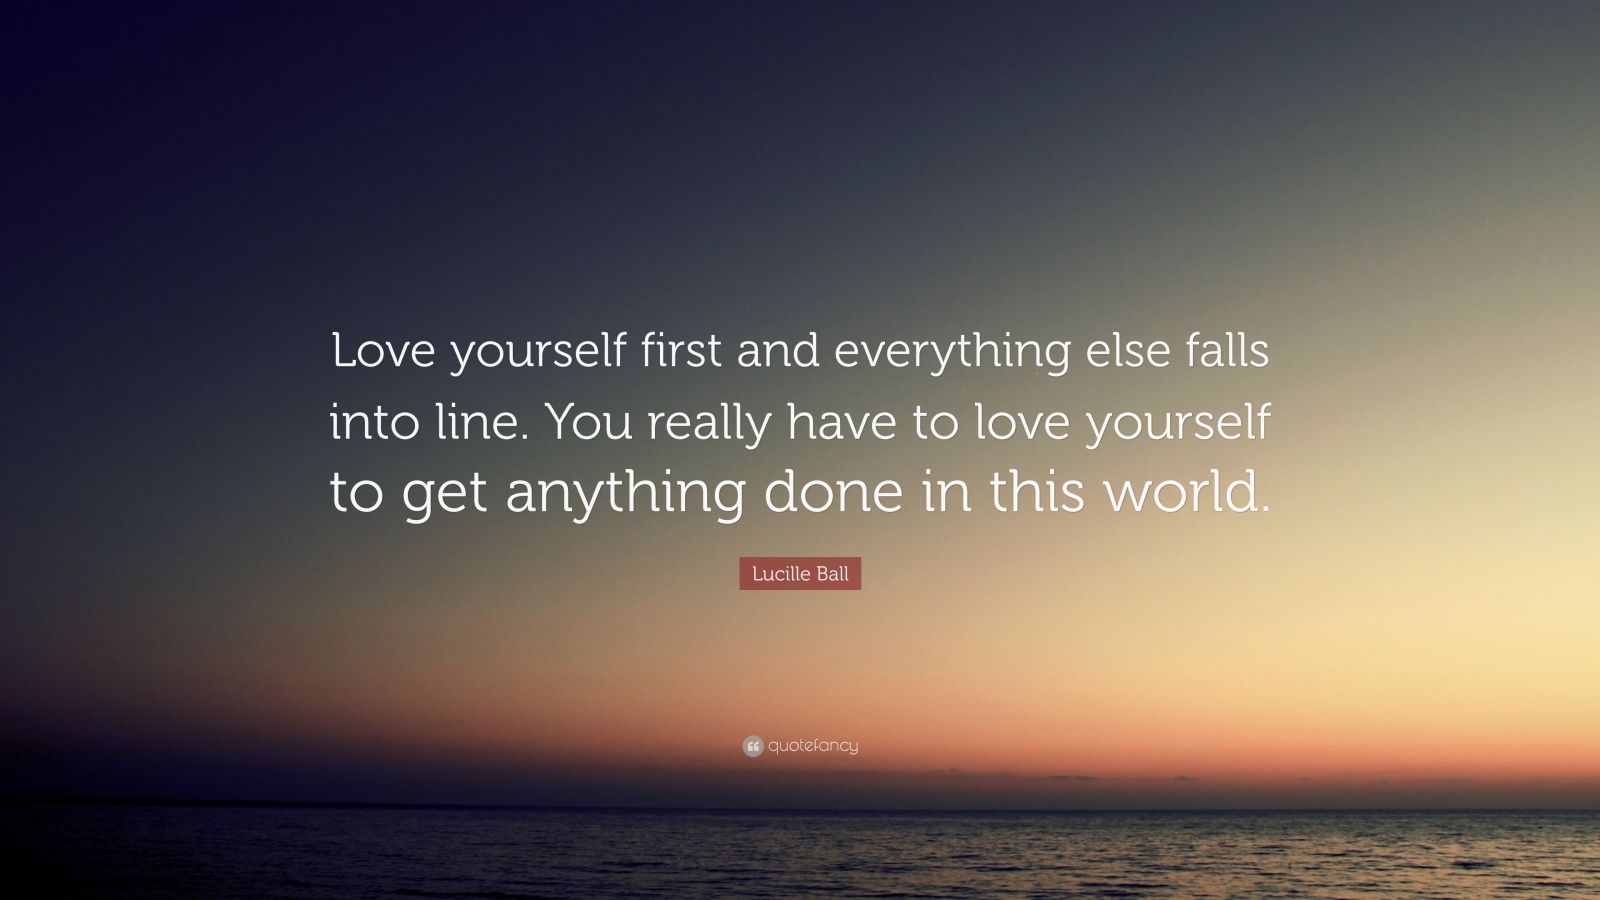 Lucille Ball Quote: “Love yourself first and everything else falls into ...